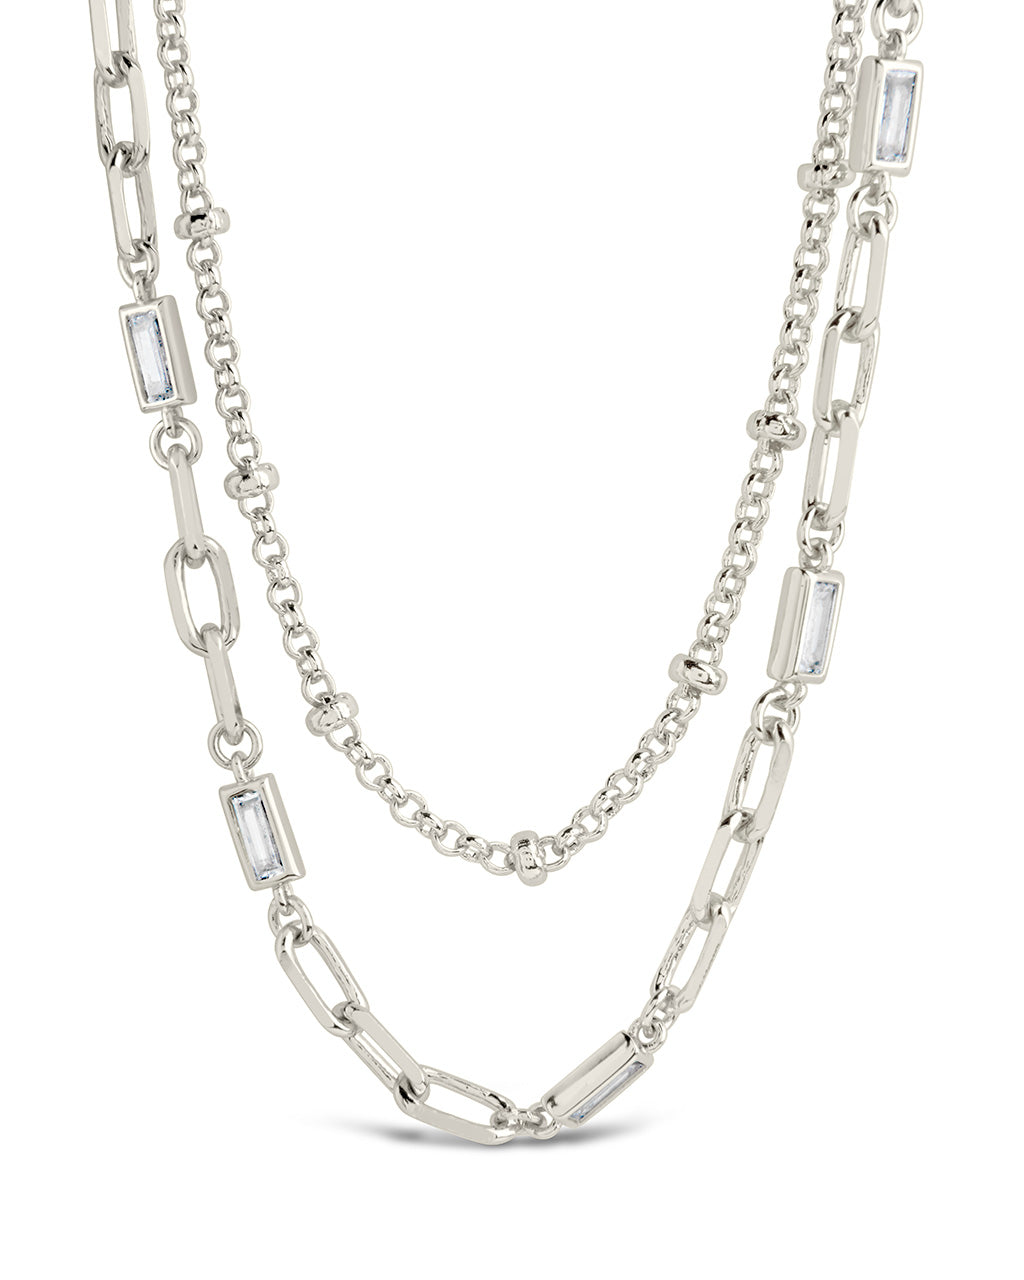 Palmer Layered Necklace Necklace Sterling Forever Silver 